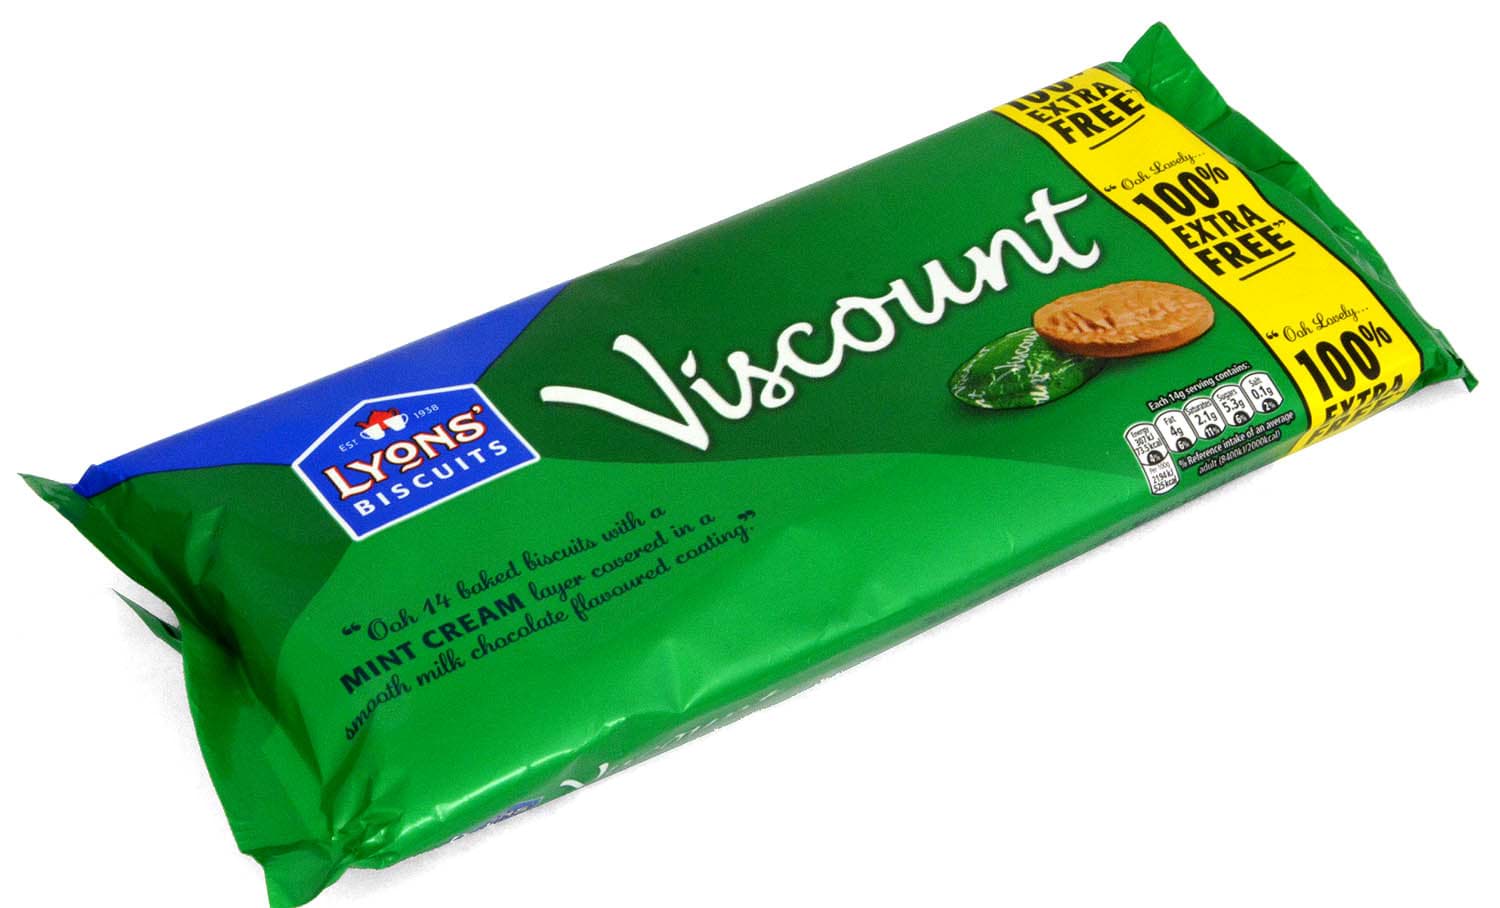 Picture of Lyons Viscount Original Mint Cream Biscuits 196g